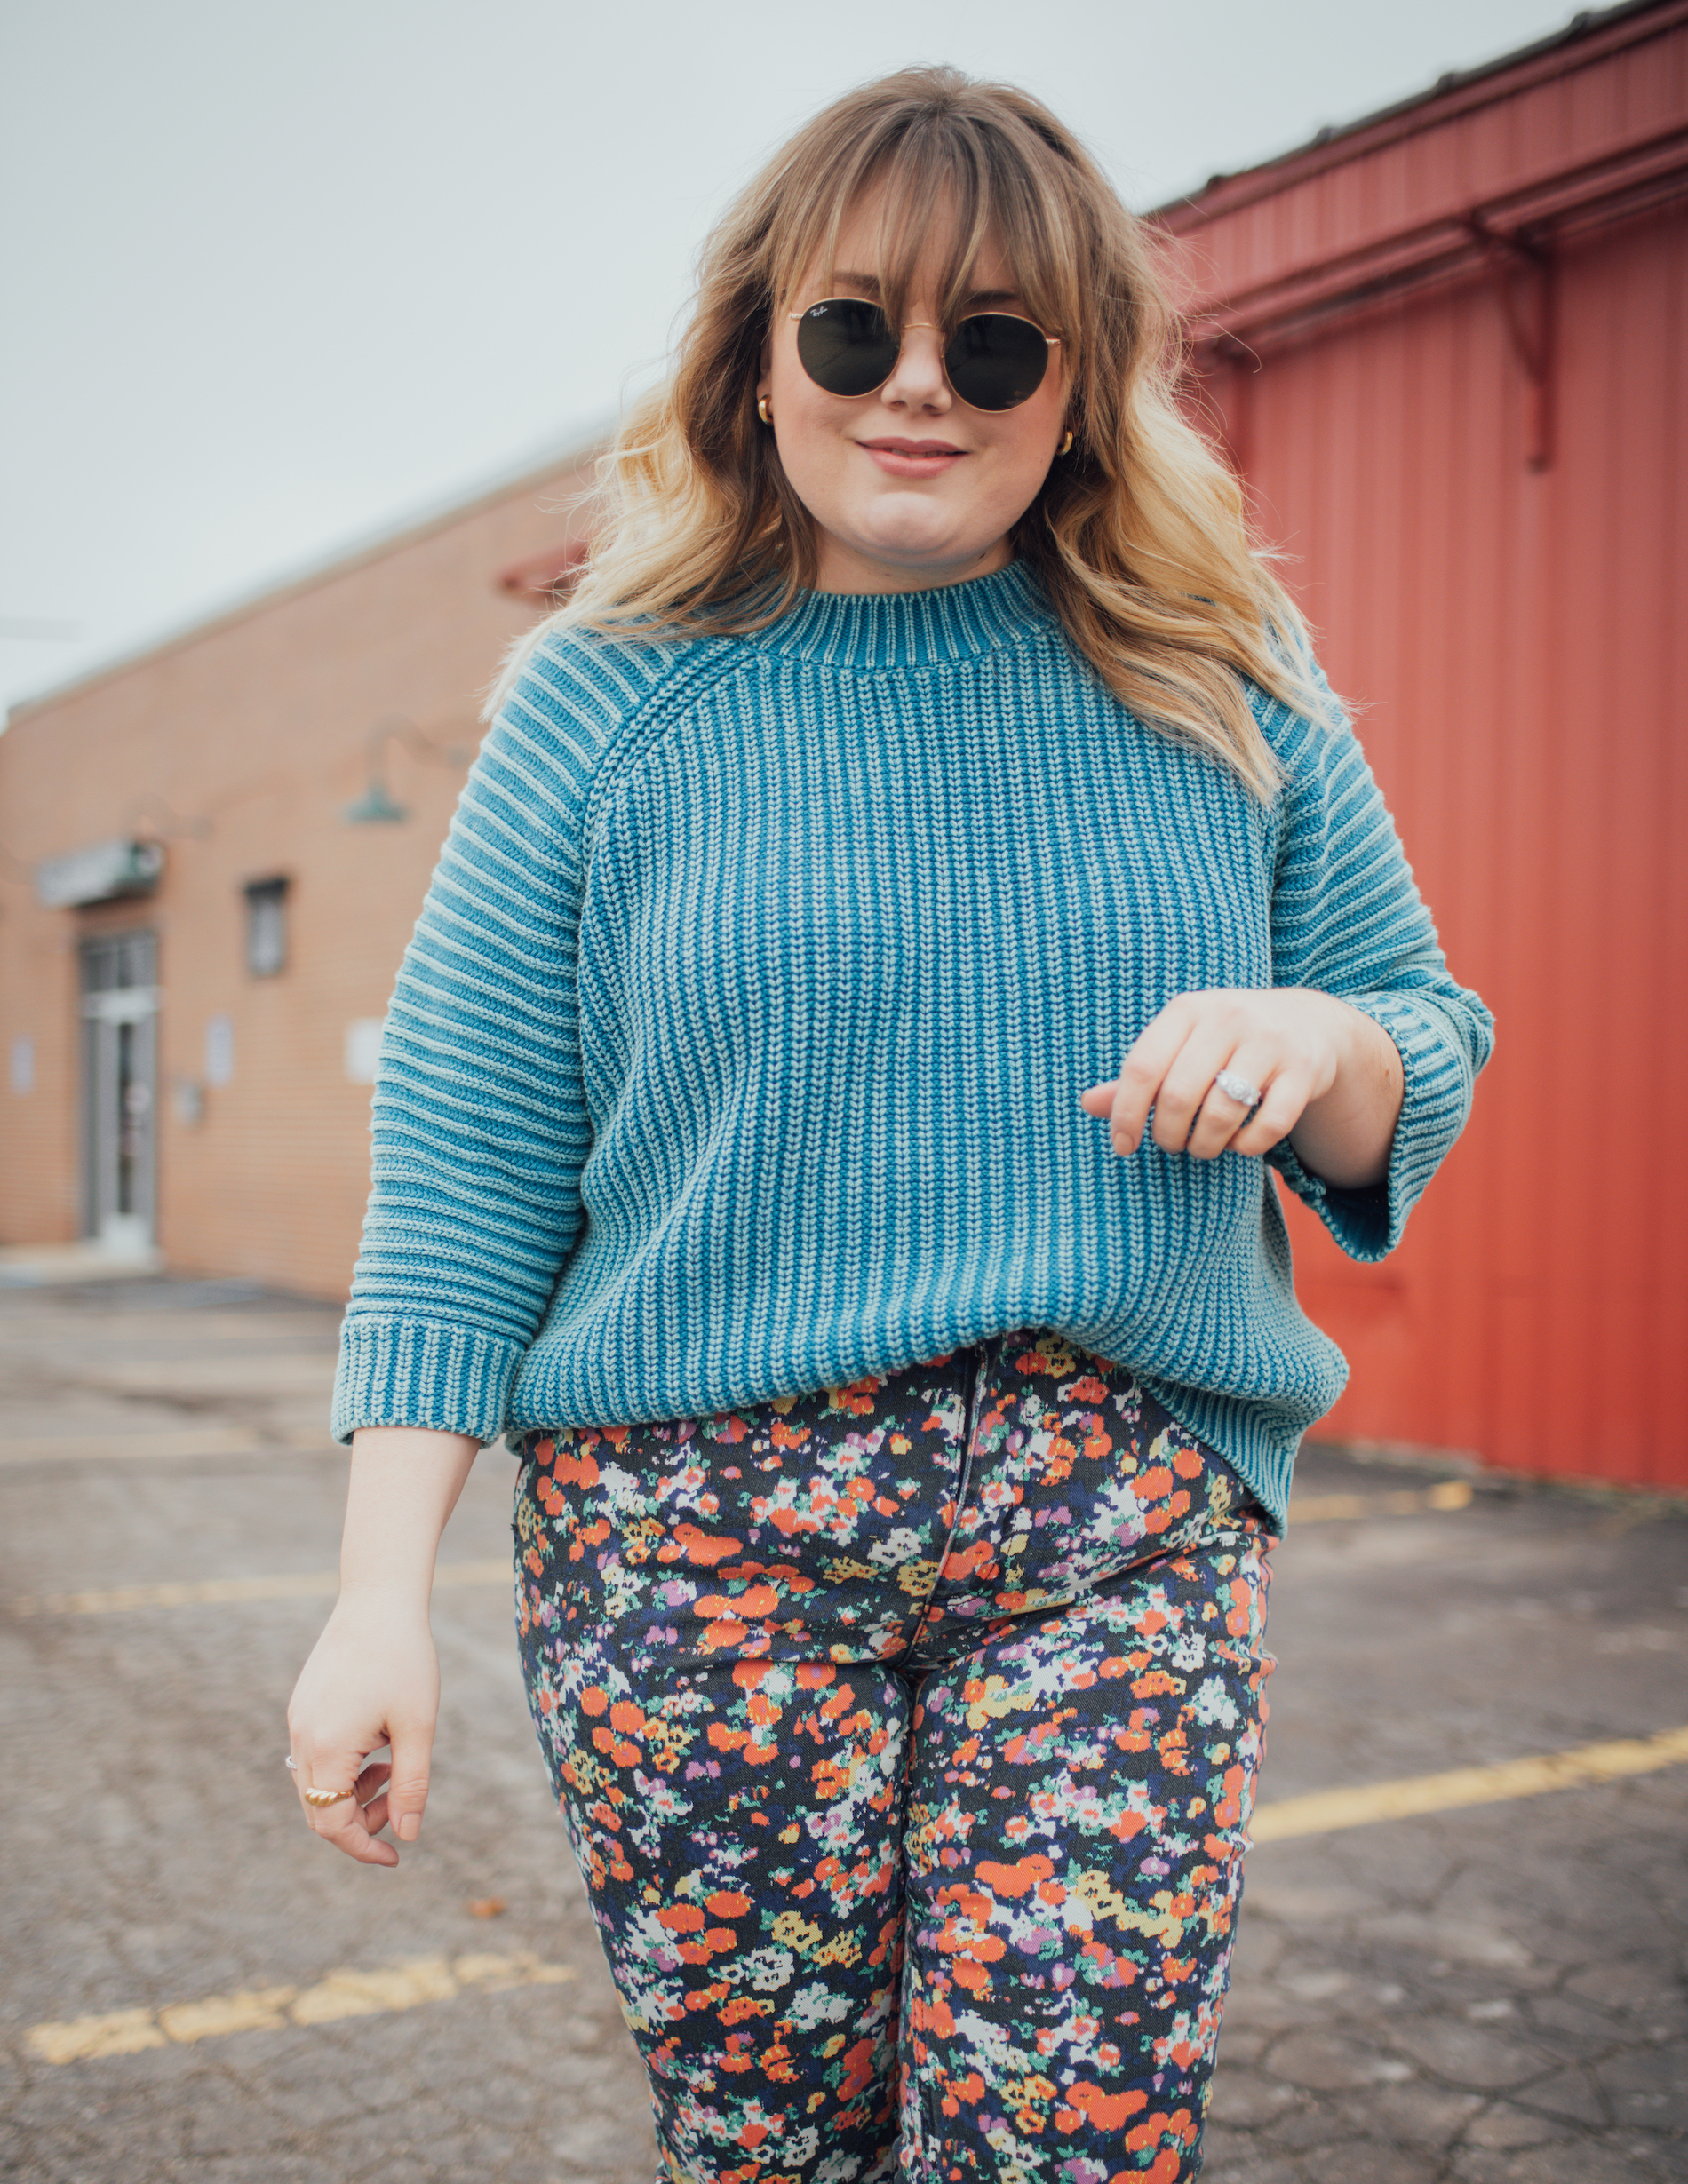 Thinking Spring With Bright Sweaters & Floral Prints. I am loving all of the plus size Anthropologie outfits! 